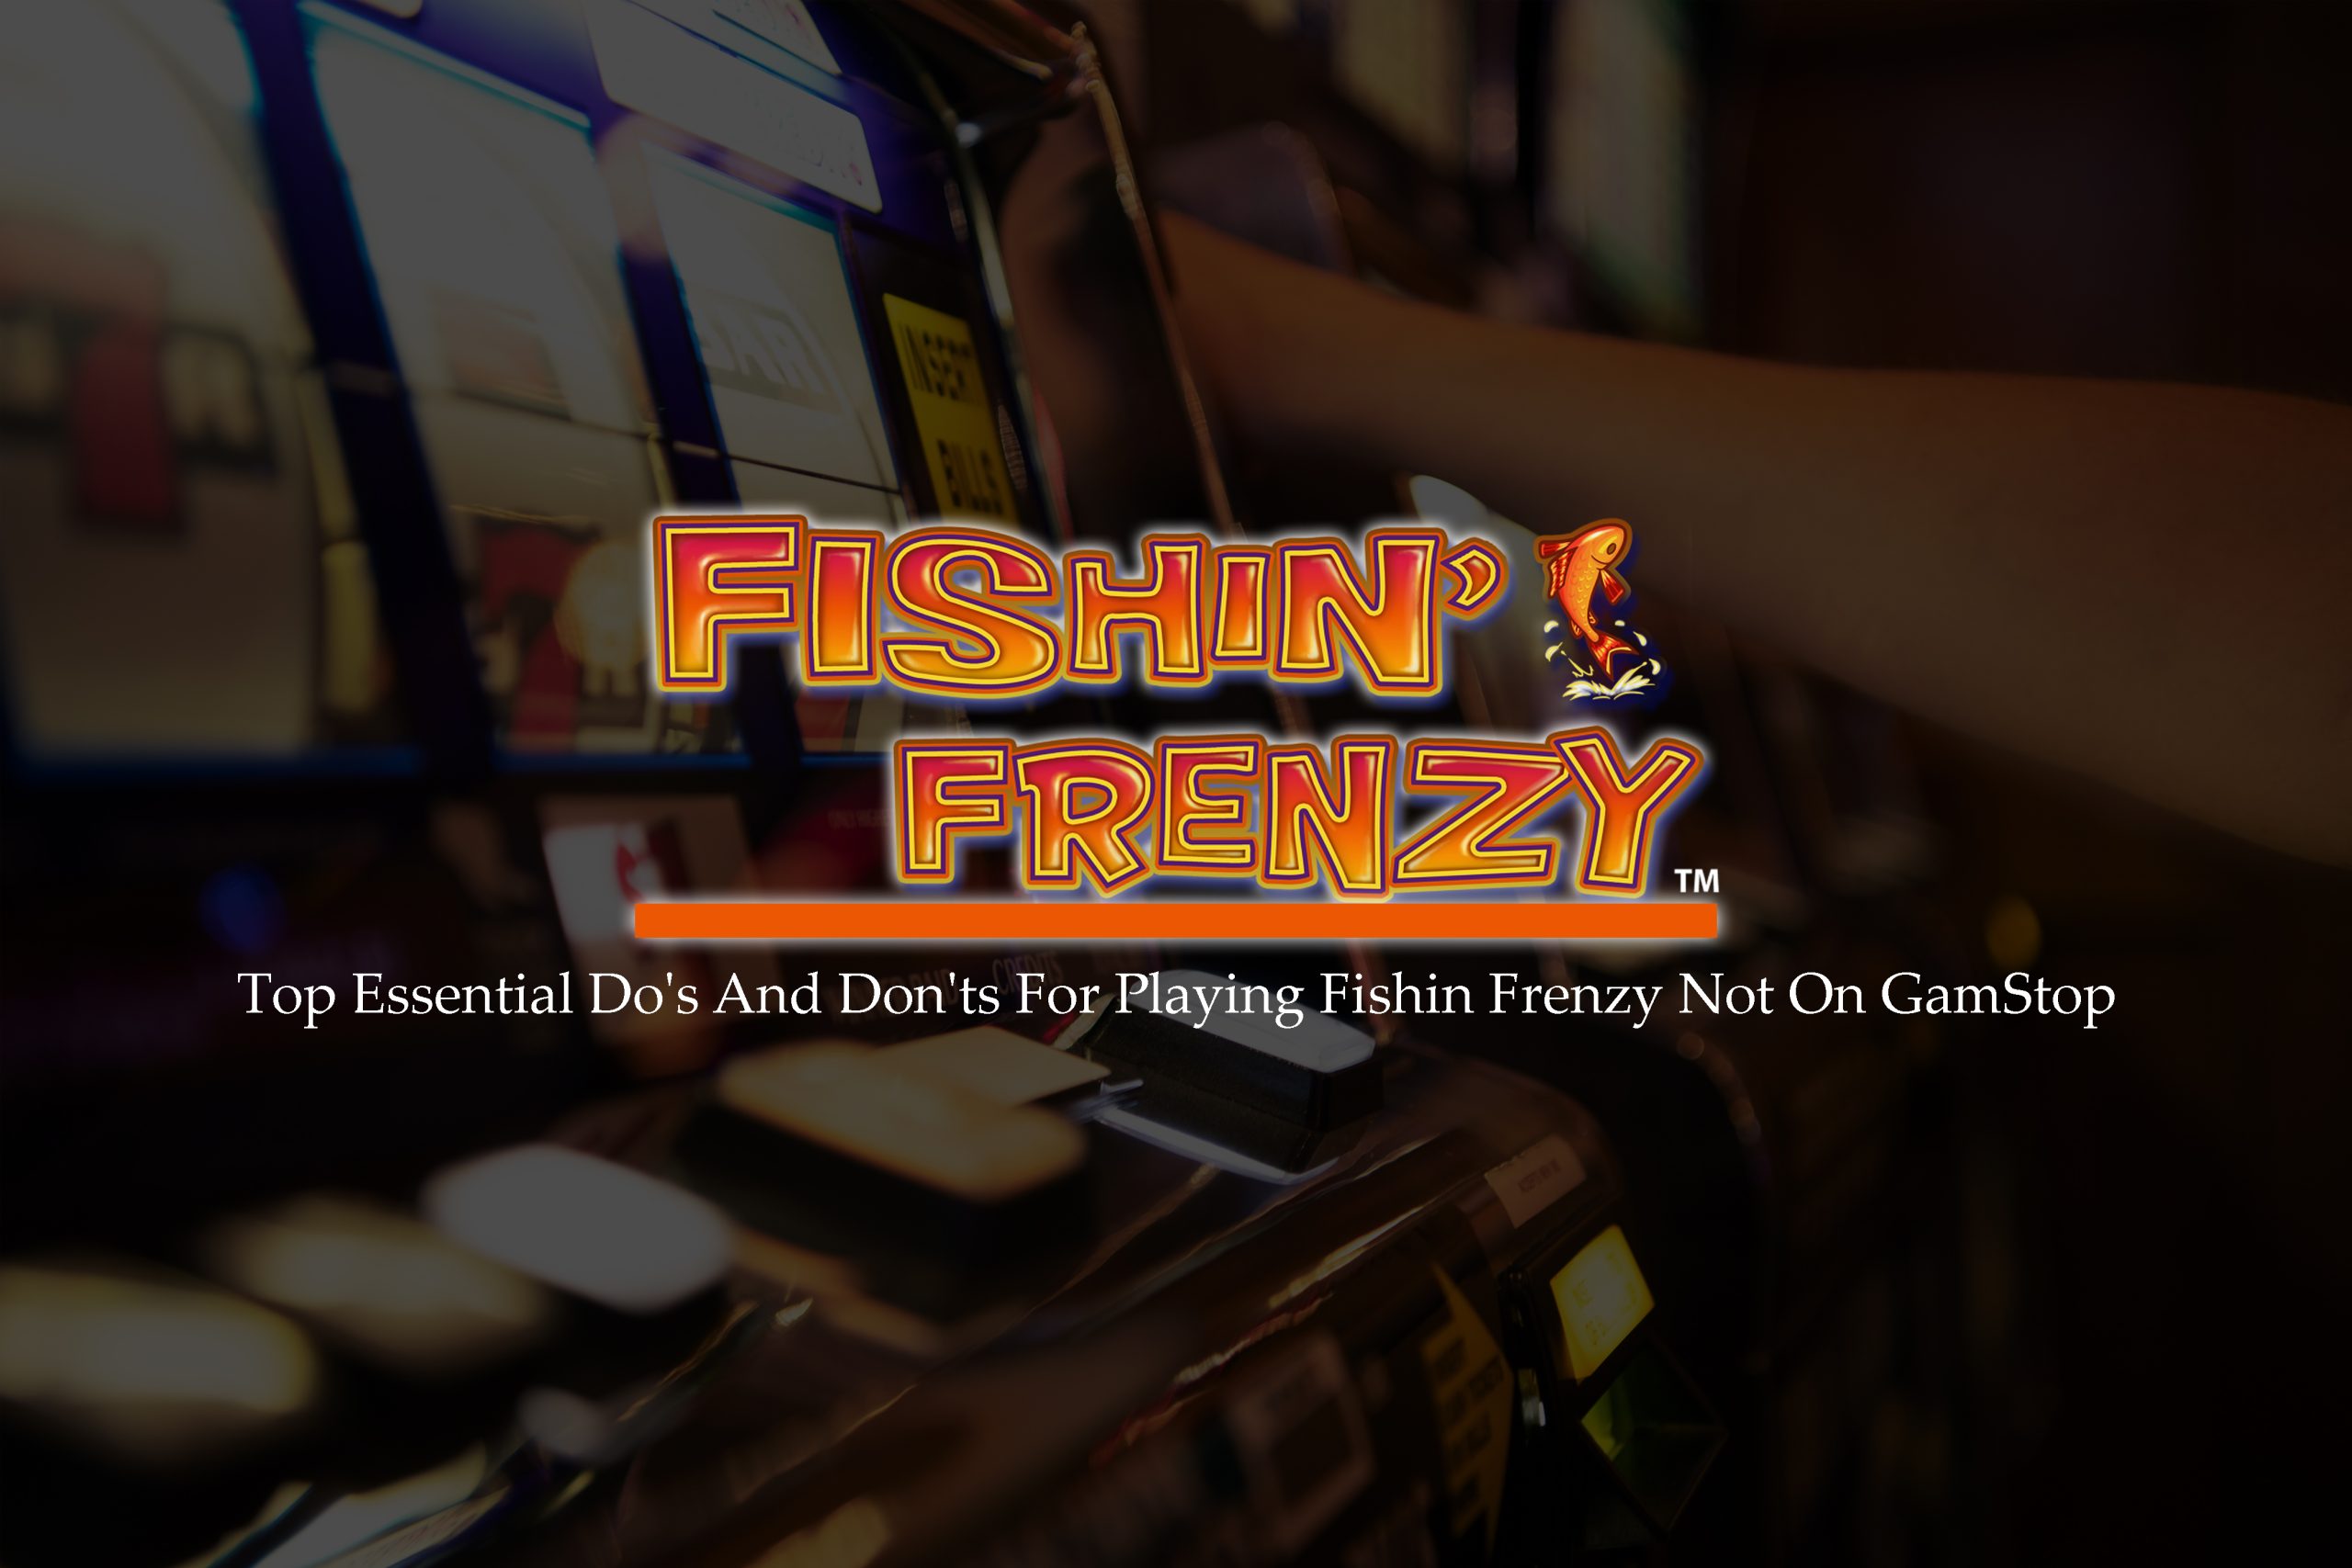 Top Essential Do's And Don'ts For Playing Fishin Frenzy Not On GamStop